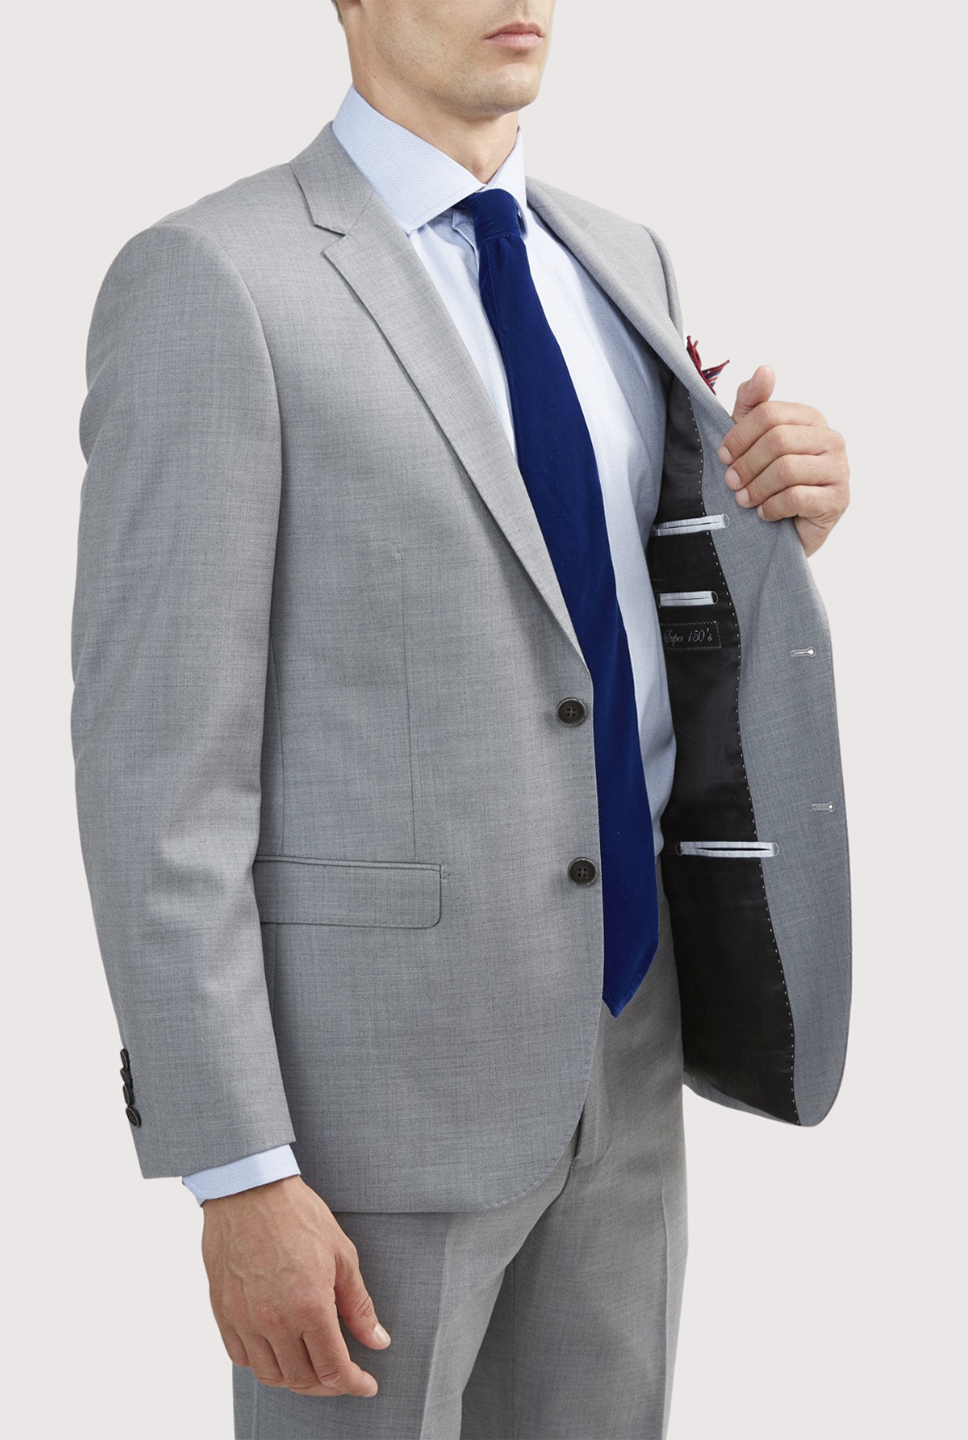 Light Gray Groom's Suit With Champagne-Colored Tie